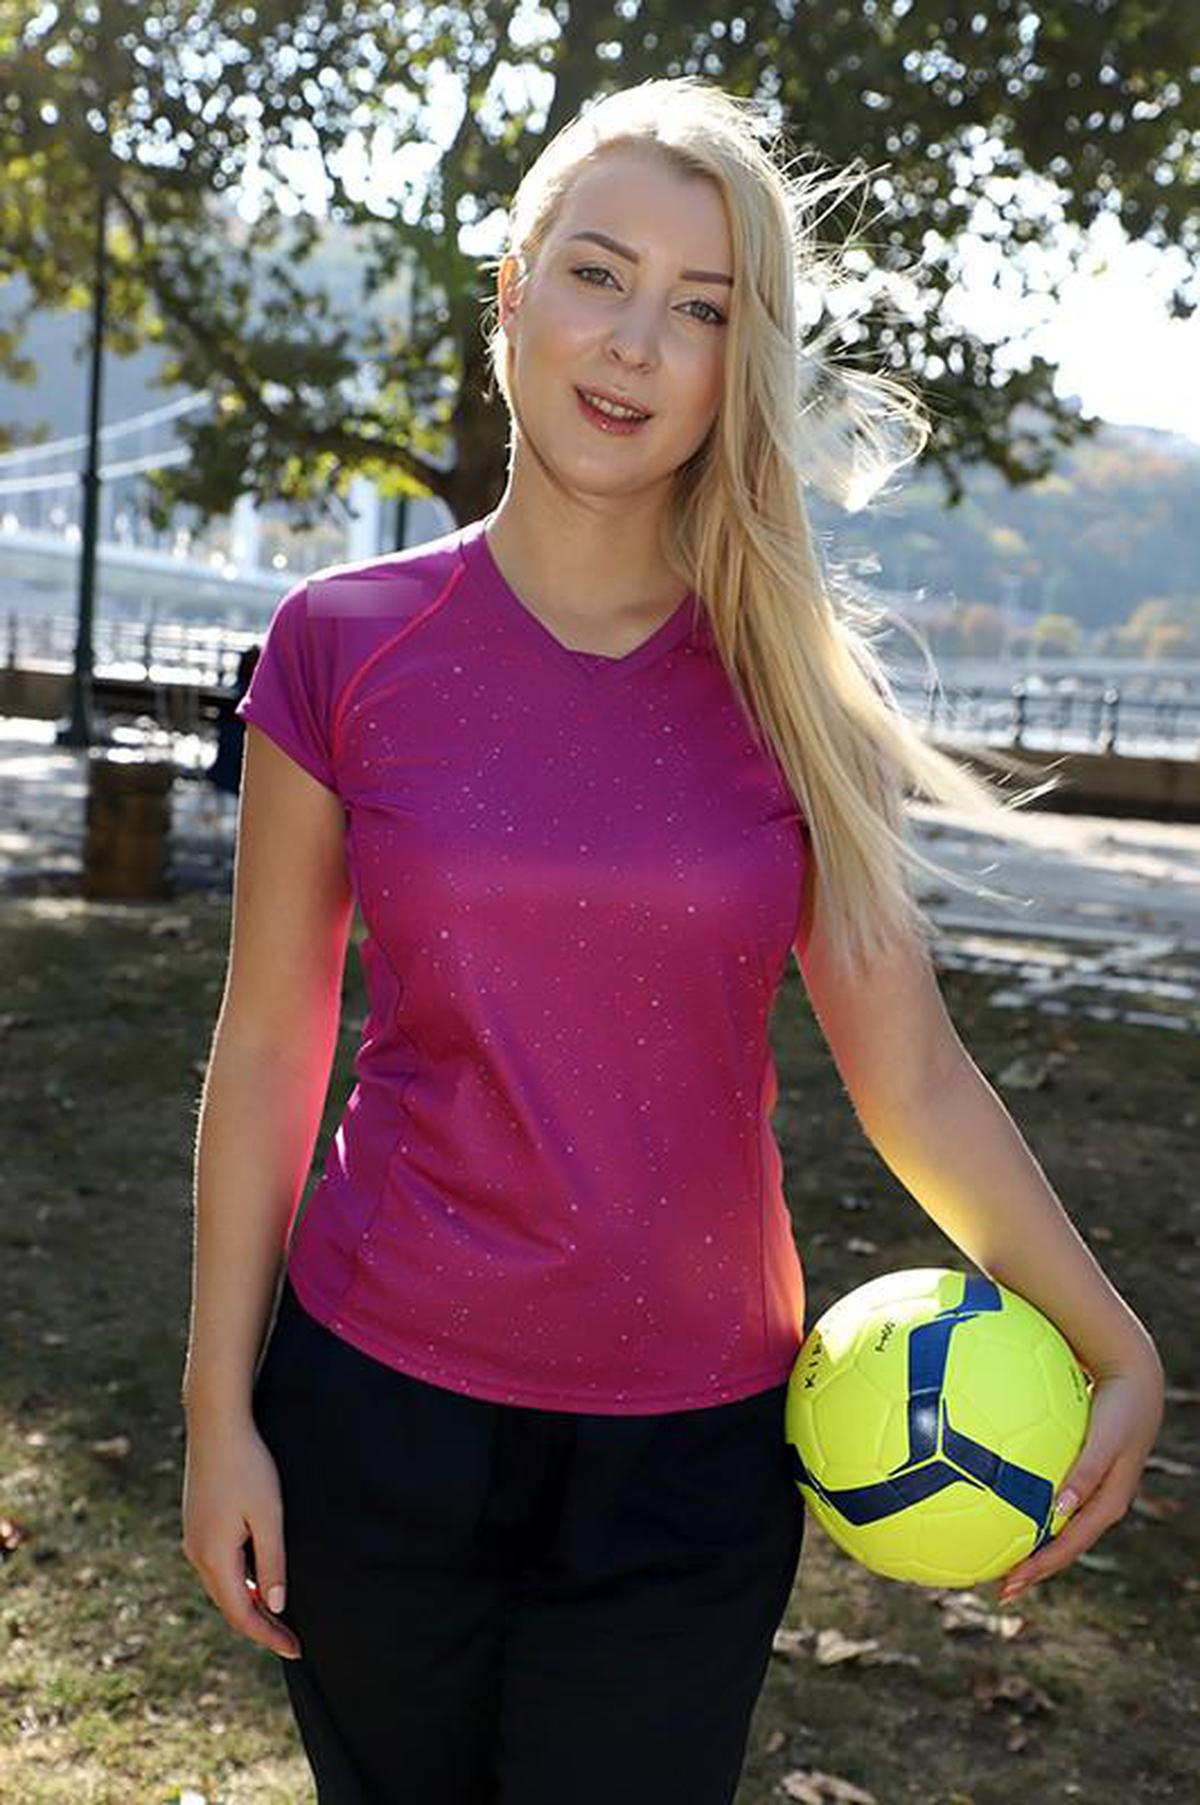 6000Kbps FHD HUSR-228 The Transcendental Big Tits Beauty Found In Hungary Is An Active Volleyball Player! Desperately bite into the ball even on the night coat! AV release of the first sex with Japanese as it is!